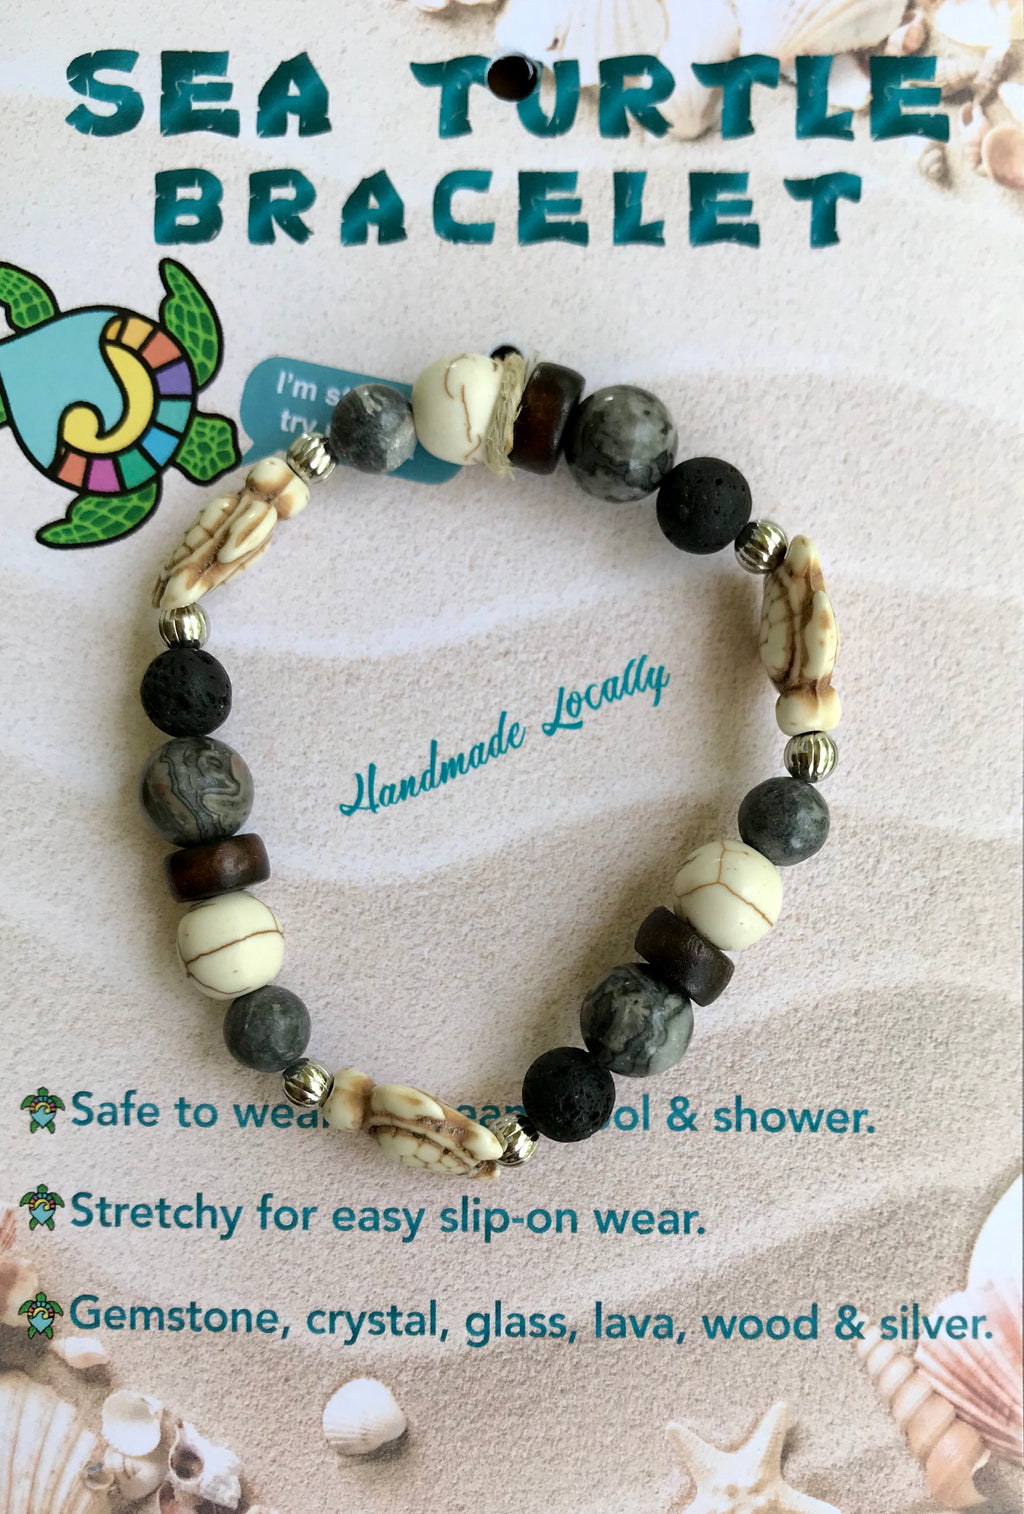 How to Make (Start and Finish) a Beaded Necklace or Bracelet | RoP